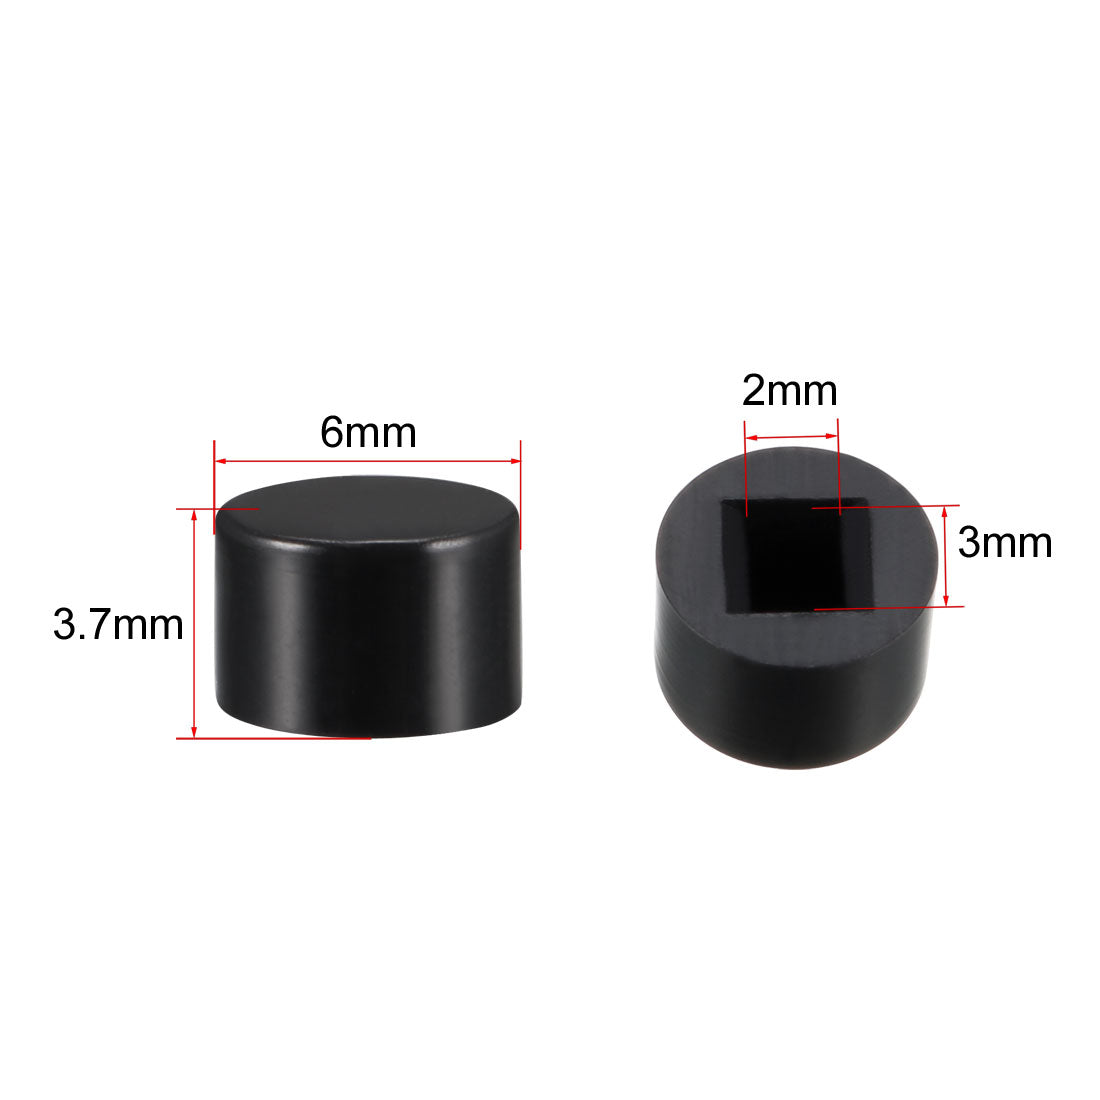 uxcell Uxcell 40Pcs Plastic 6x3.7mm Pushbutton Switch Caps Cover Keycaps Protector for 5.8x5.8 Latching Tactile Switch Black